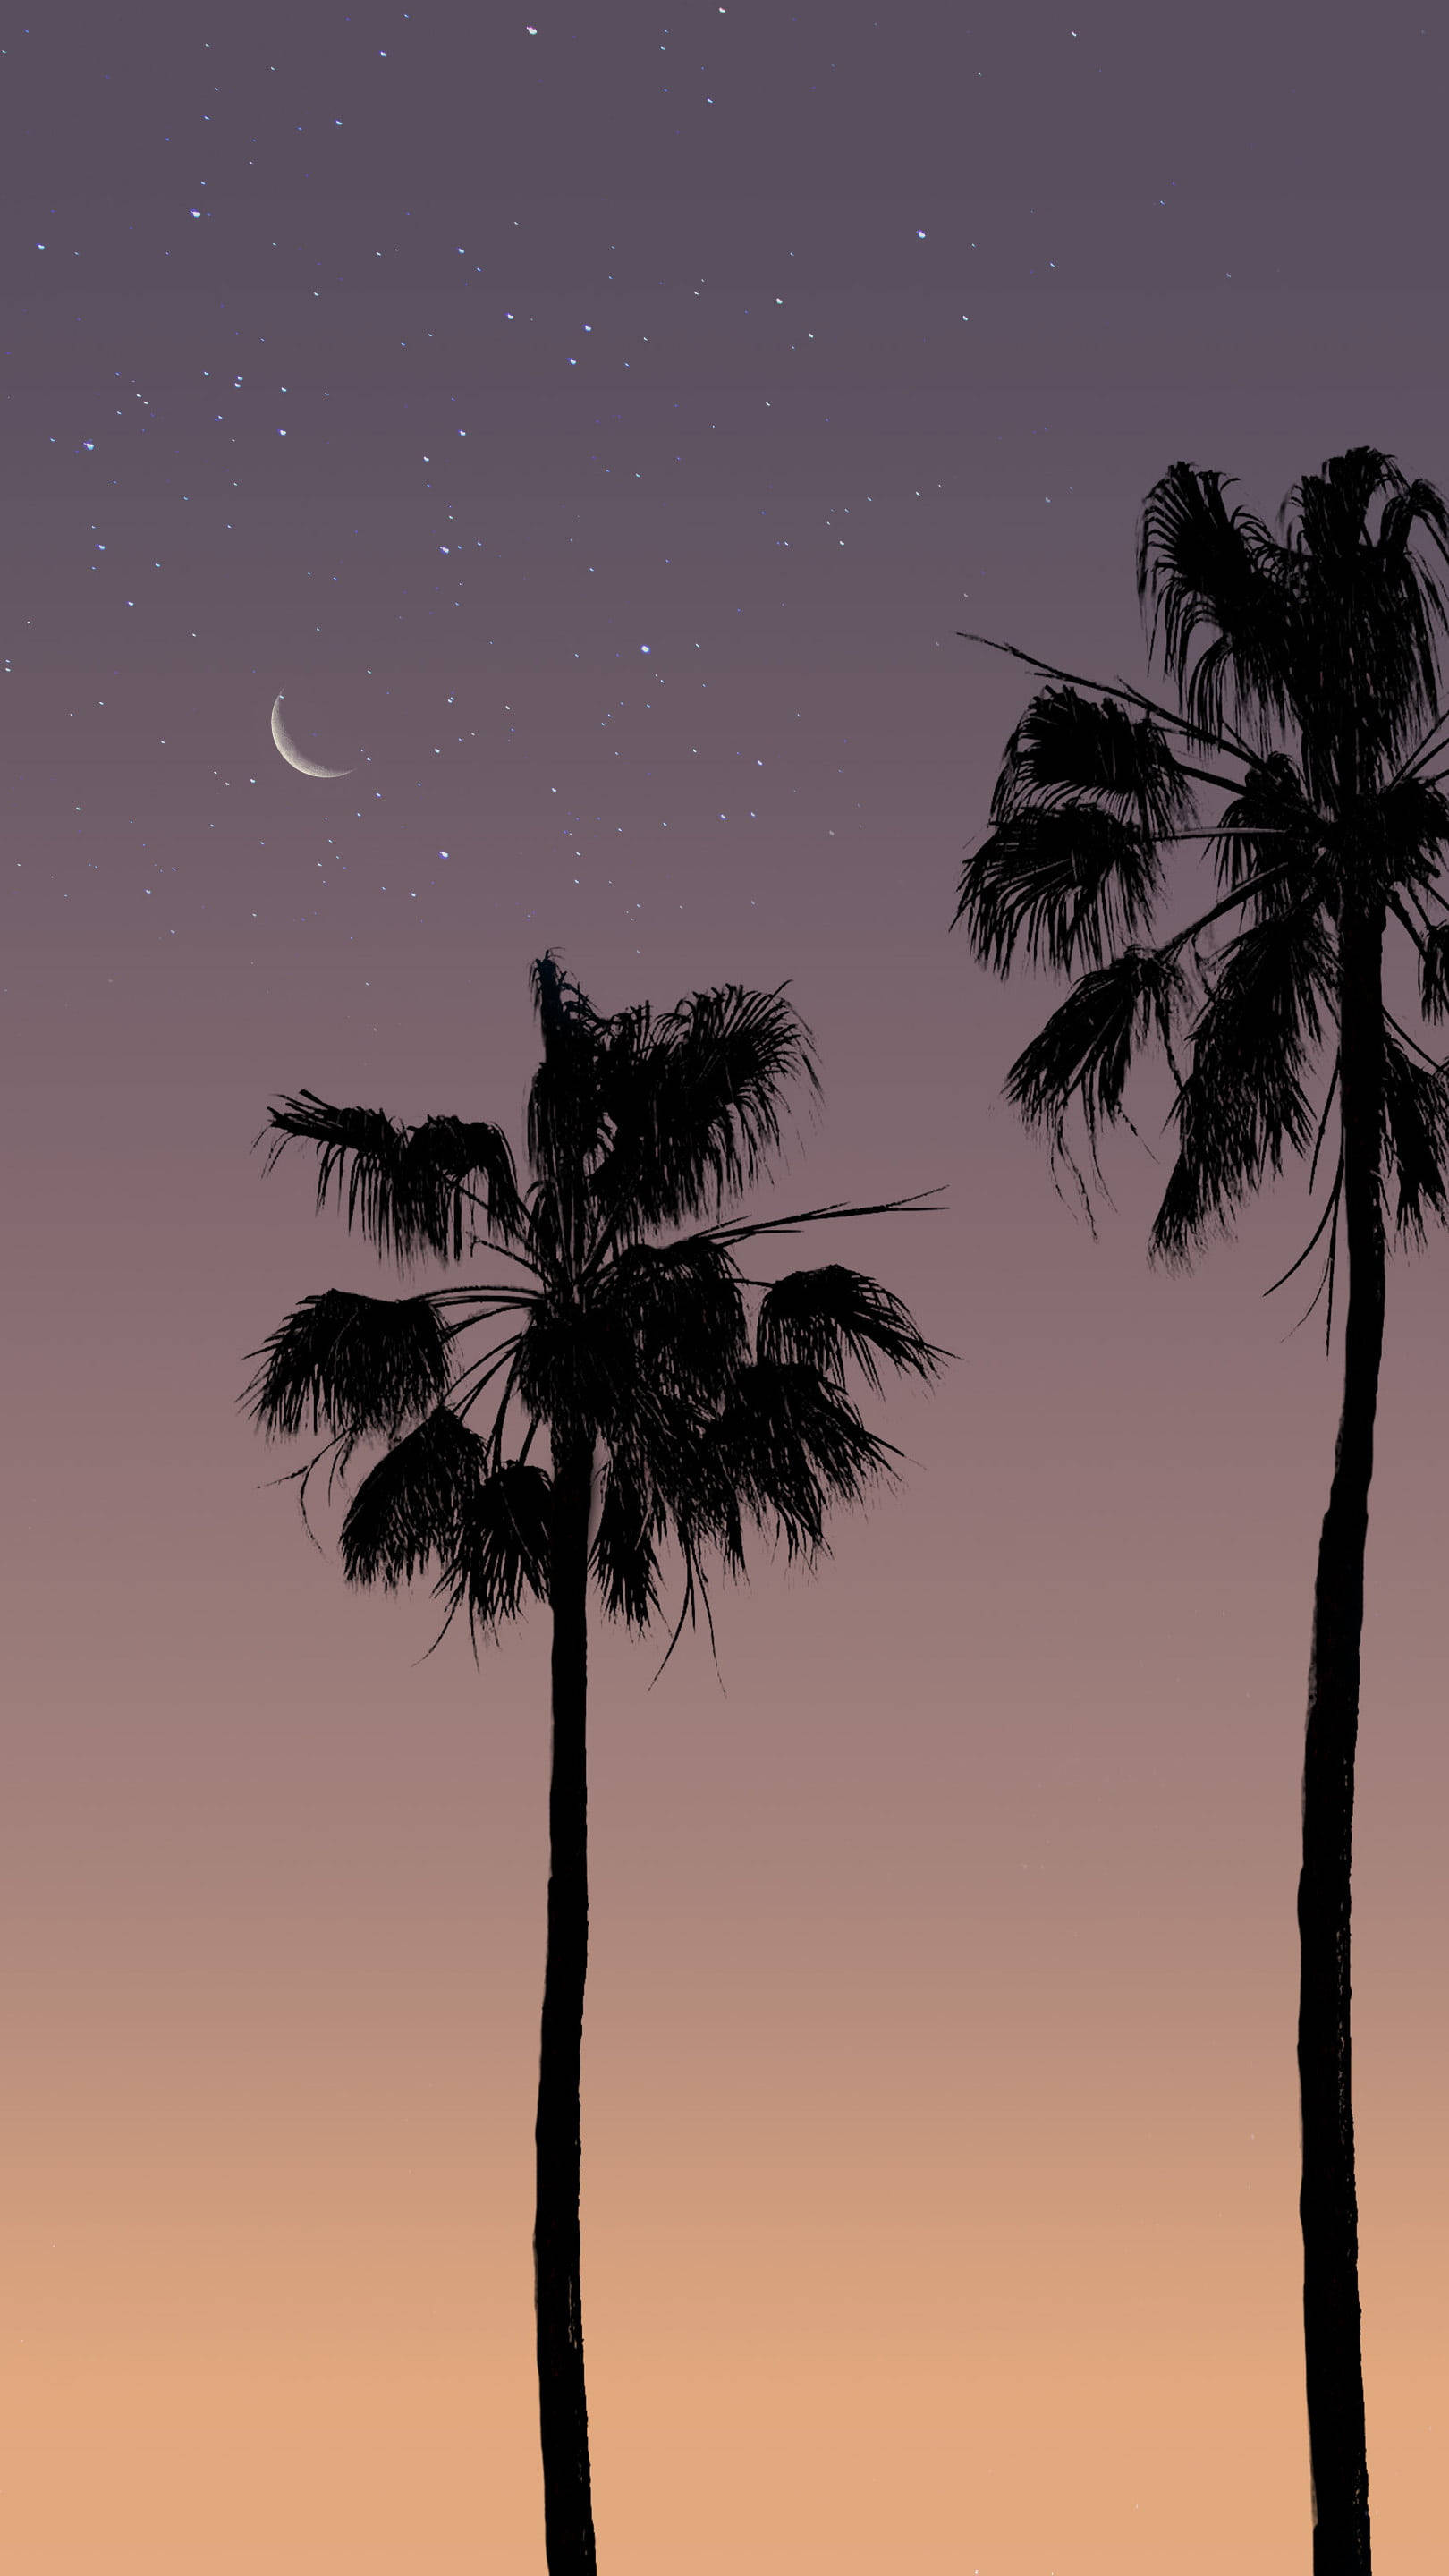 Aesthetic Sunset With Coconut Tree Silhouettes Background